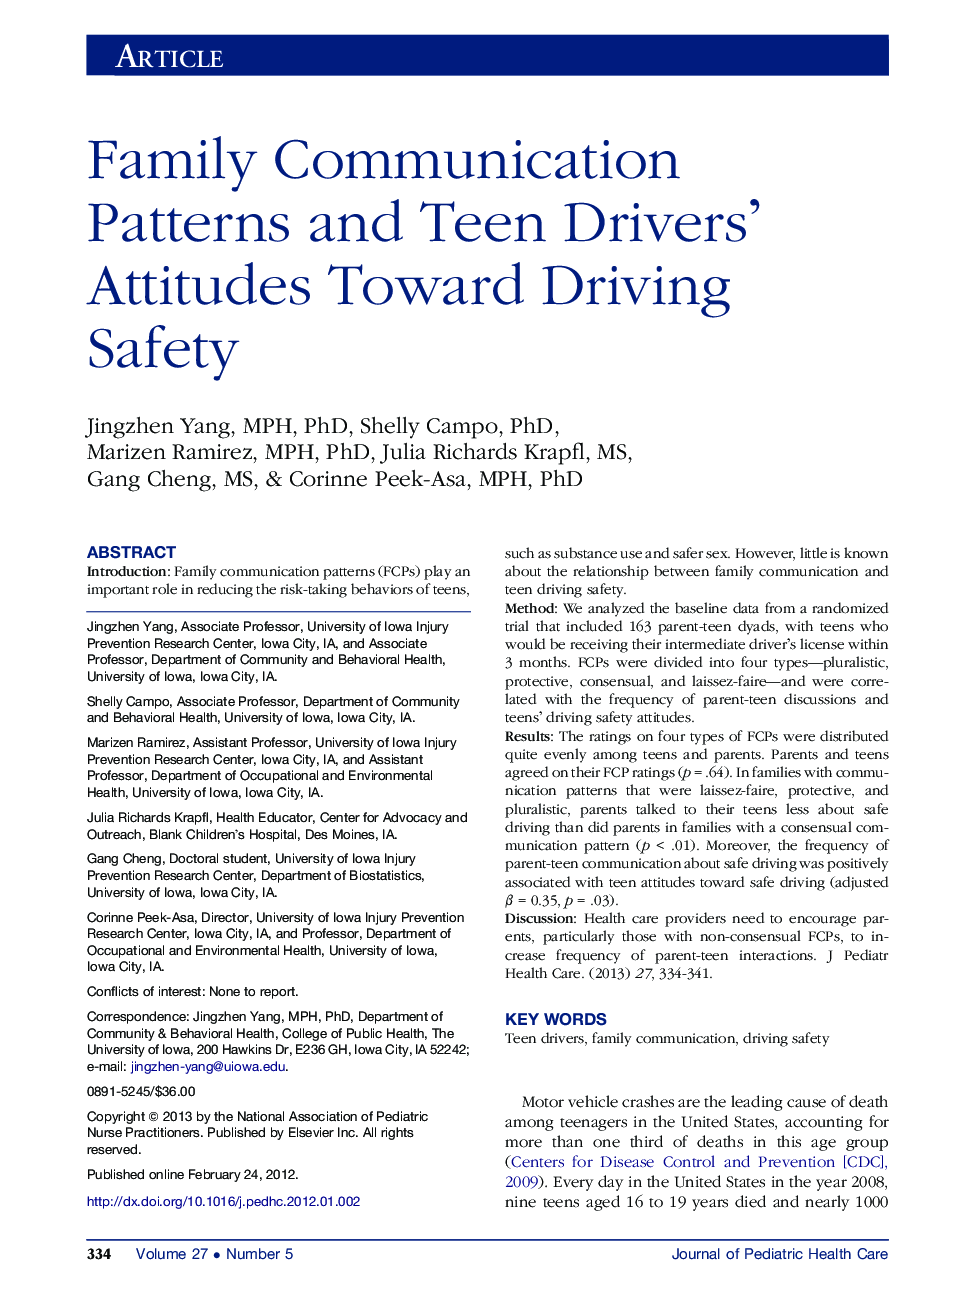 Family Communication Patterns and Teen Drivers’ Attitudes Toward Driving Safety 